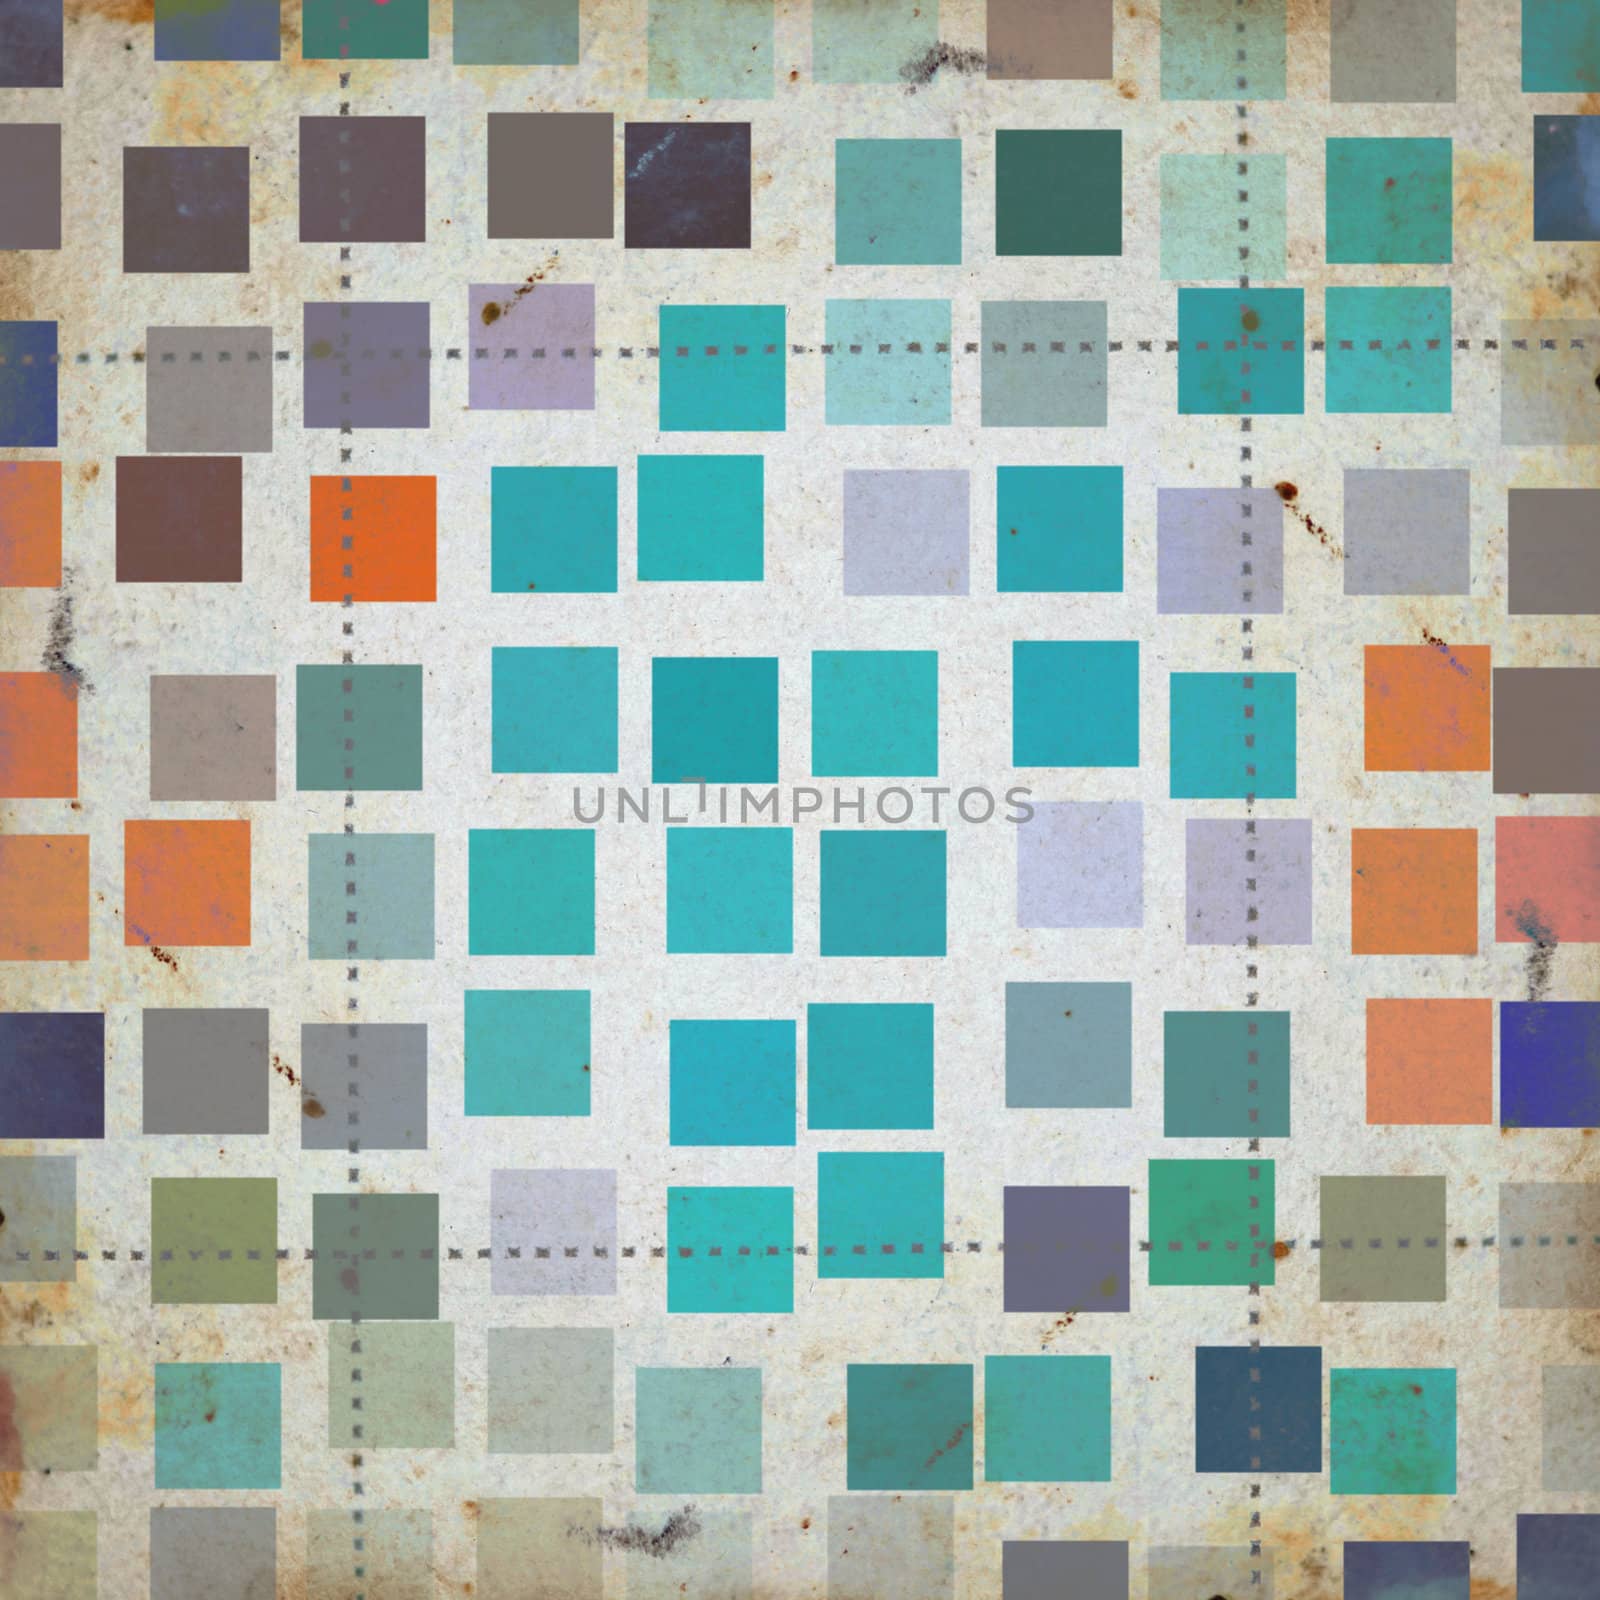 Grunge squares colorful abstract pattern on textured paper. Background illustration.